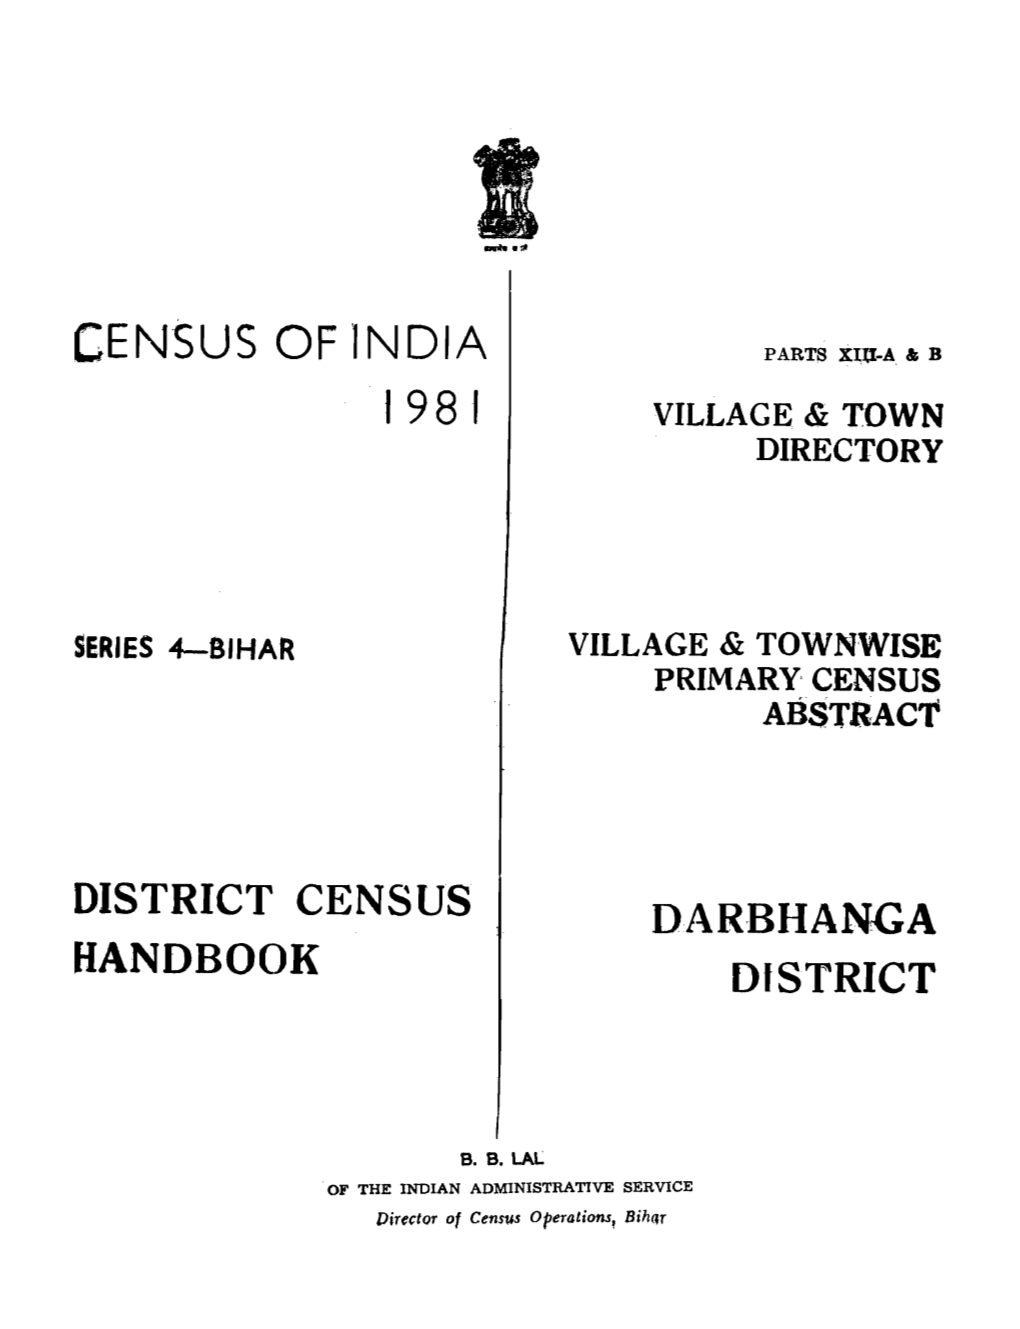 Village & Townwise Primary Census Abstract, Series-4, Bihar